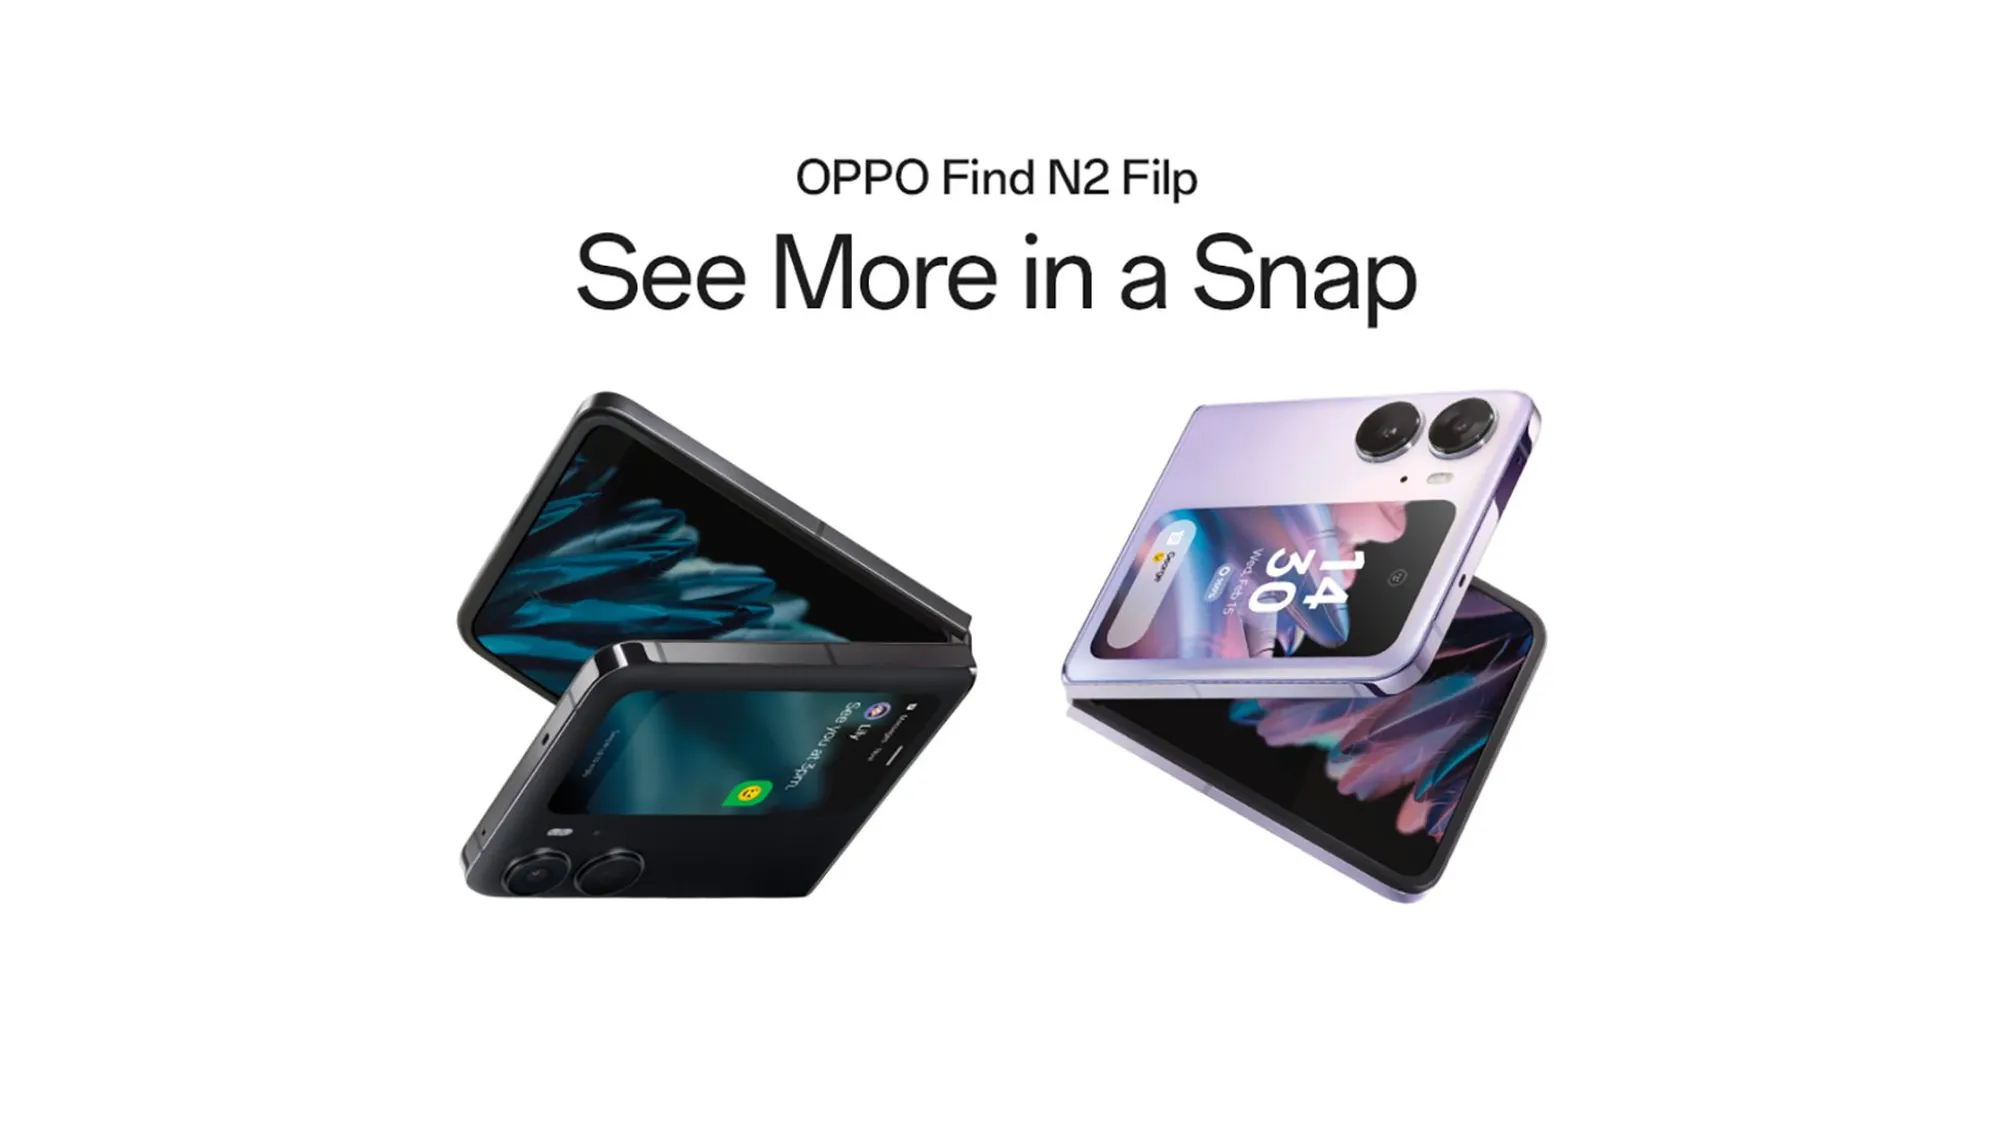 oppo find n2 flip the ultimate smartphone for creativity and productivity